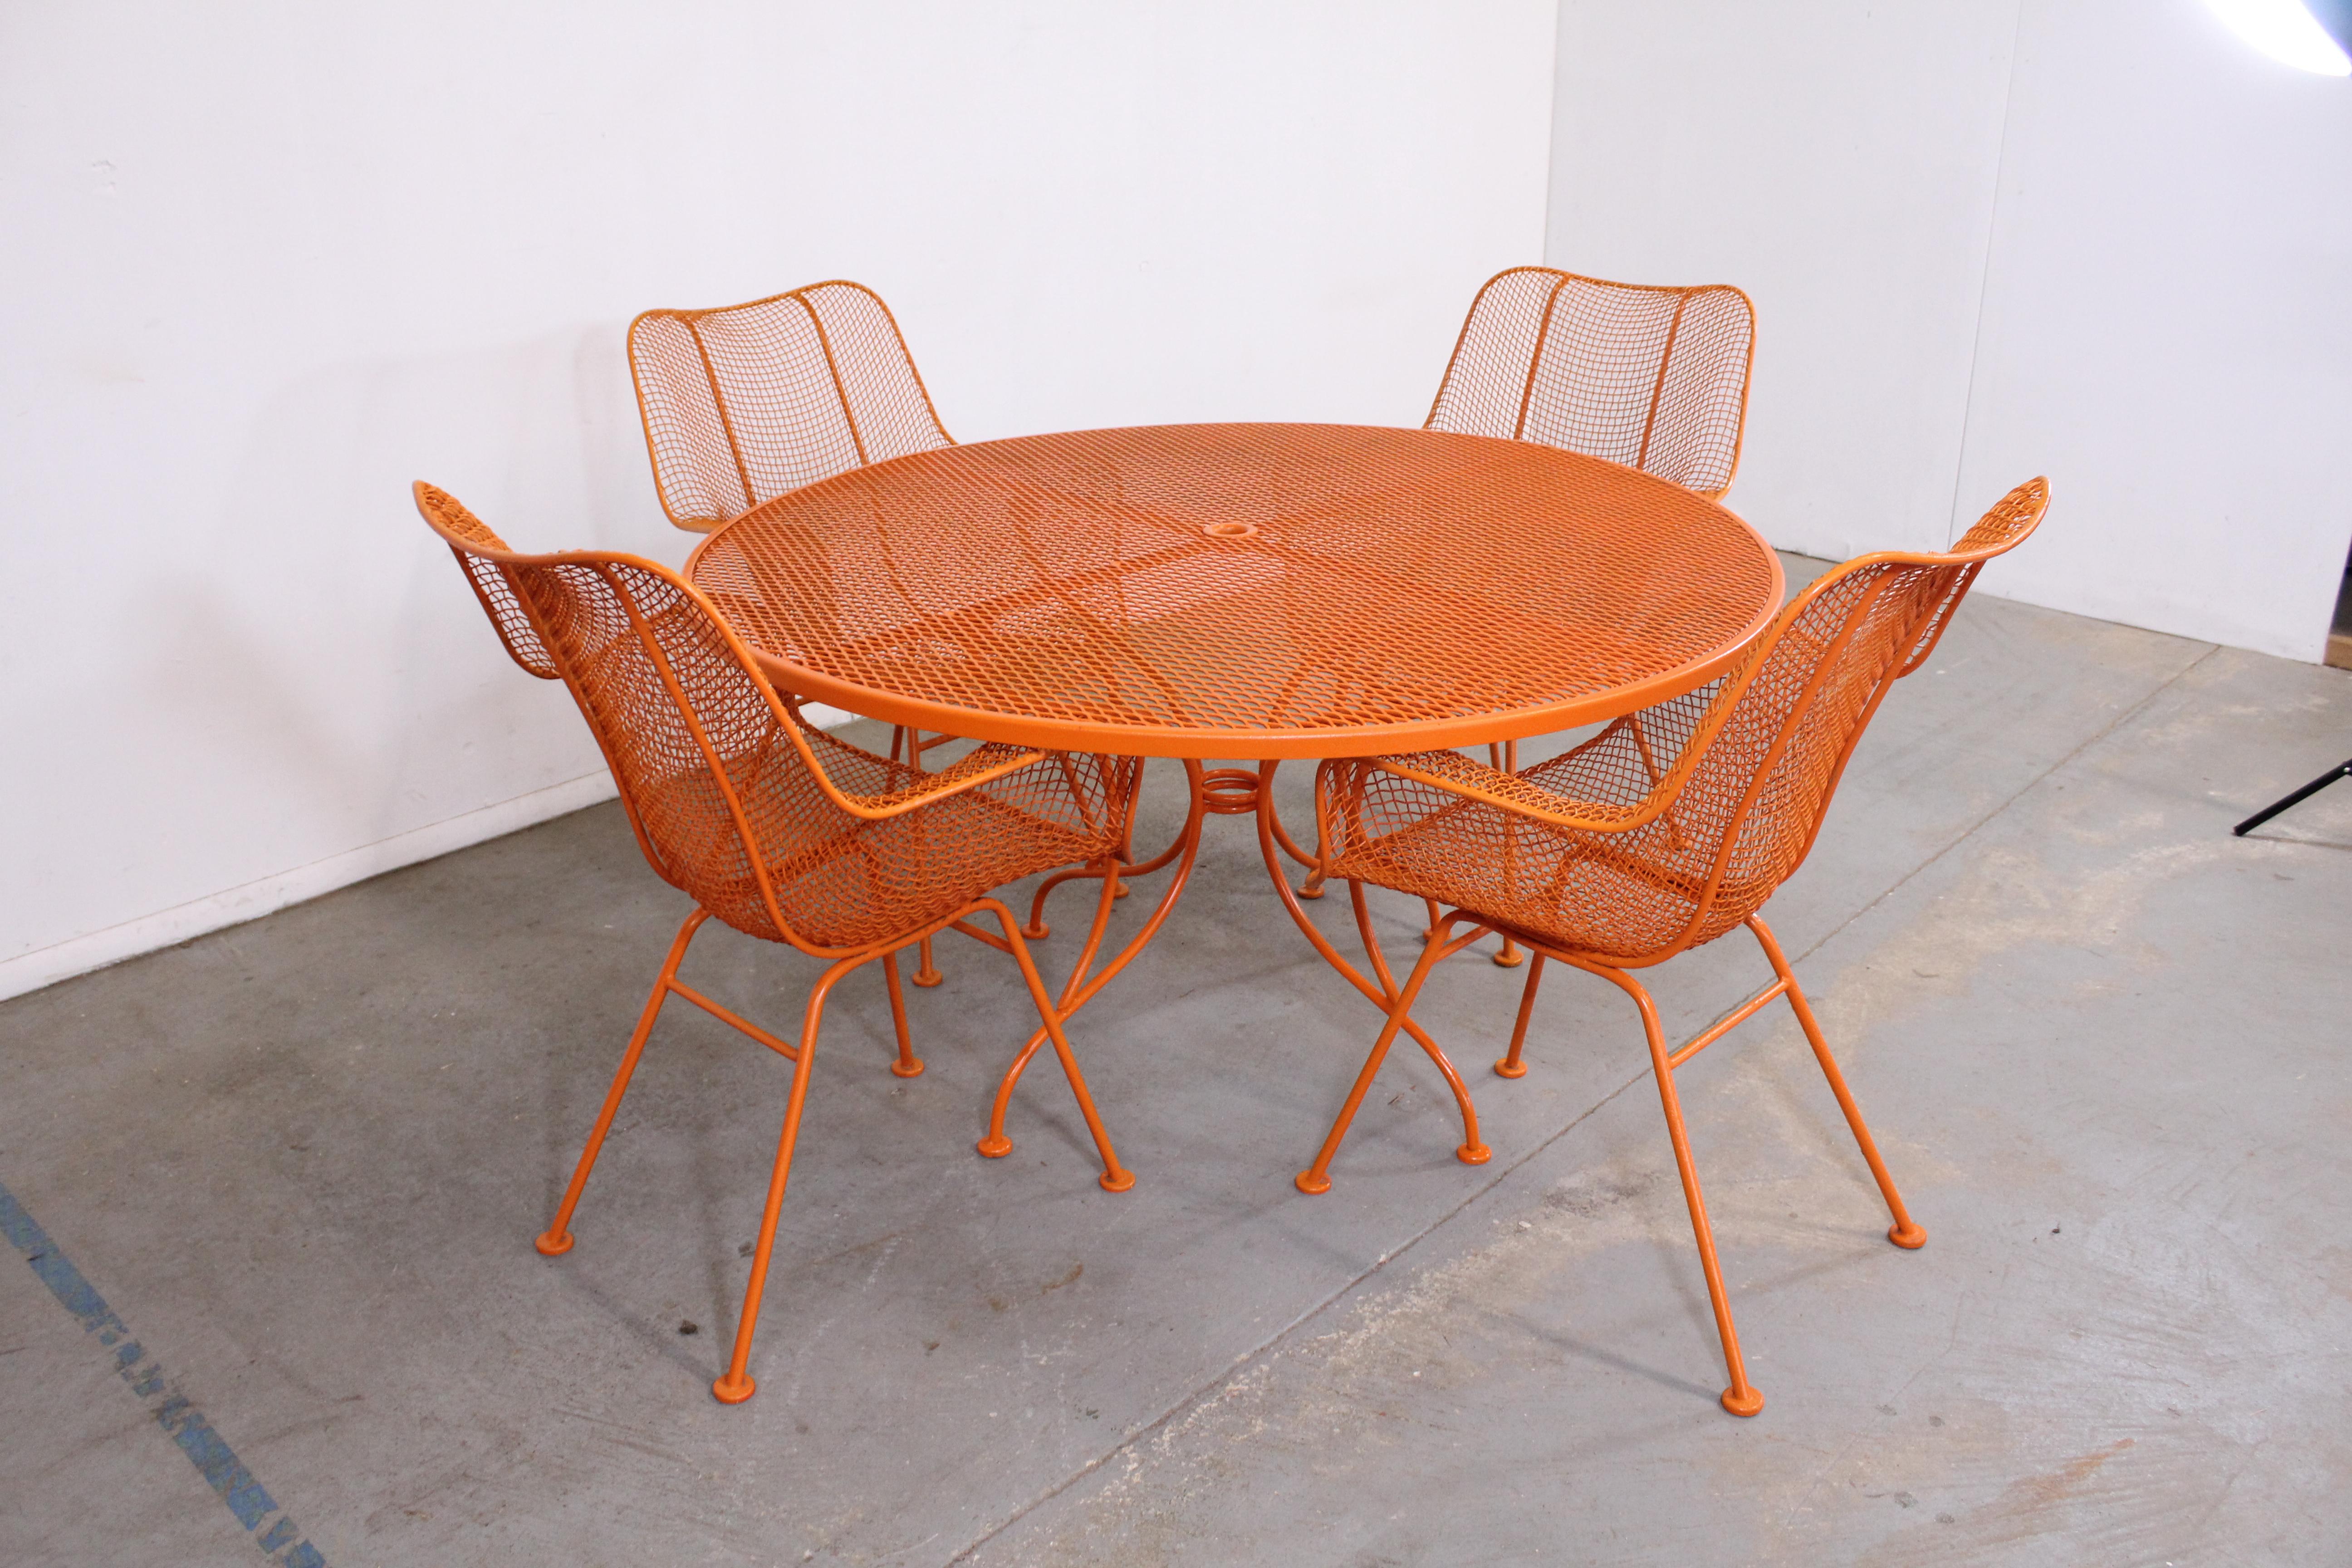 American Mid-Century Modern Woodard Sculptura Table and 4 Chairs